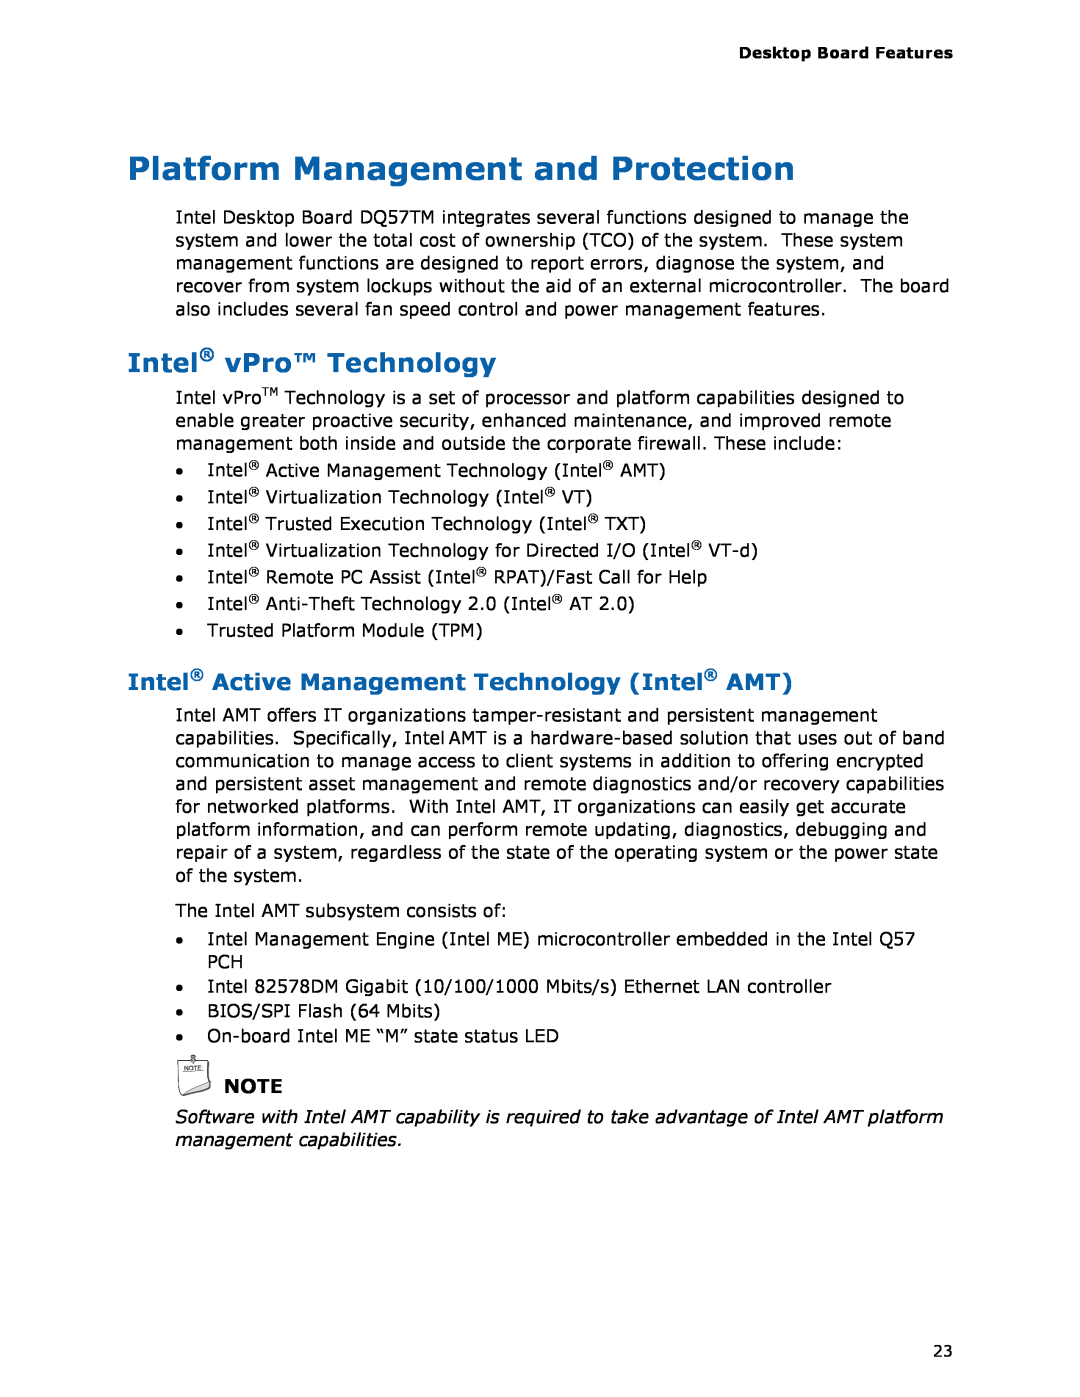 Intel DQ57TM manual Platform Management and Protection, Intel vPro Technology, Intel Active Management Technology Intel AMT 